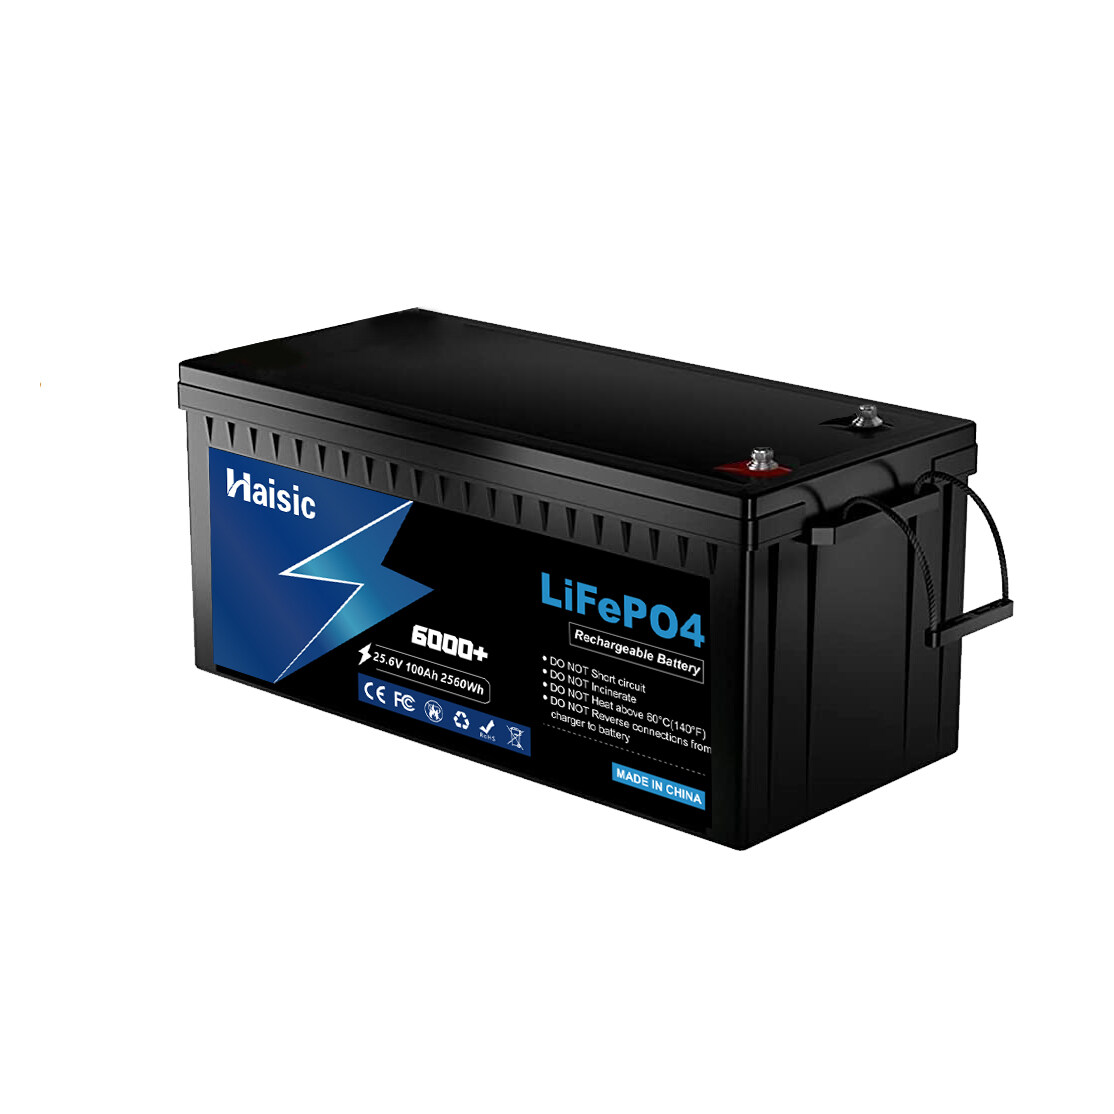 china lifepo4 lithium battery pack supplier, china lifepo4 lithium battery pack manufacturer